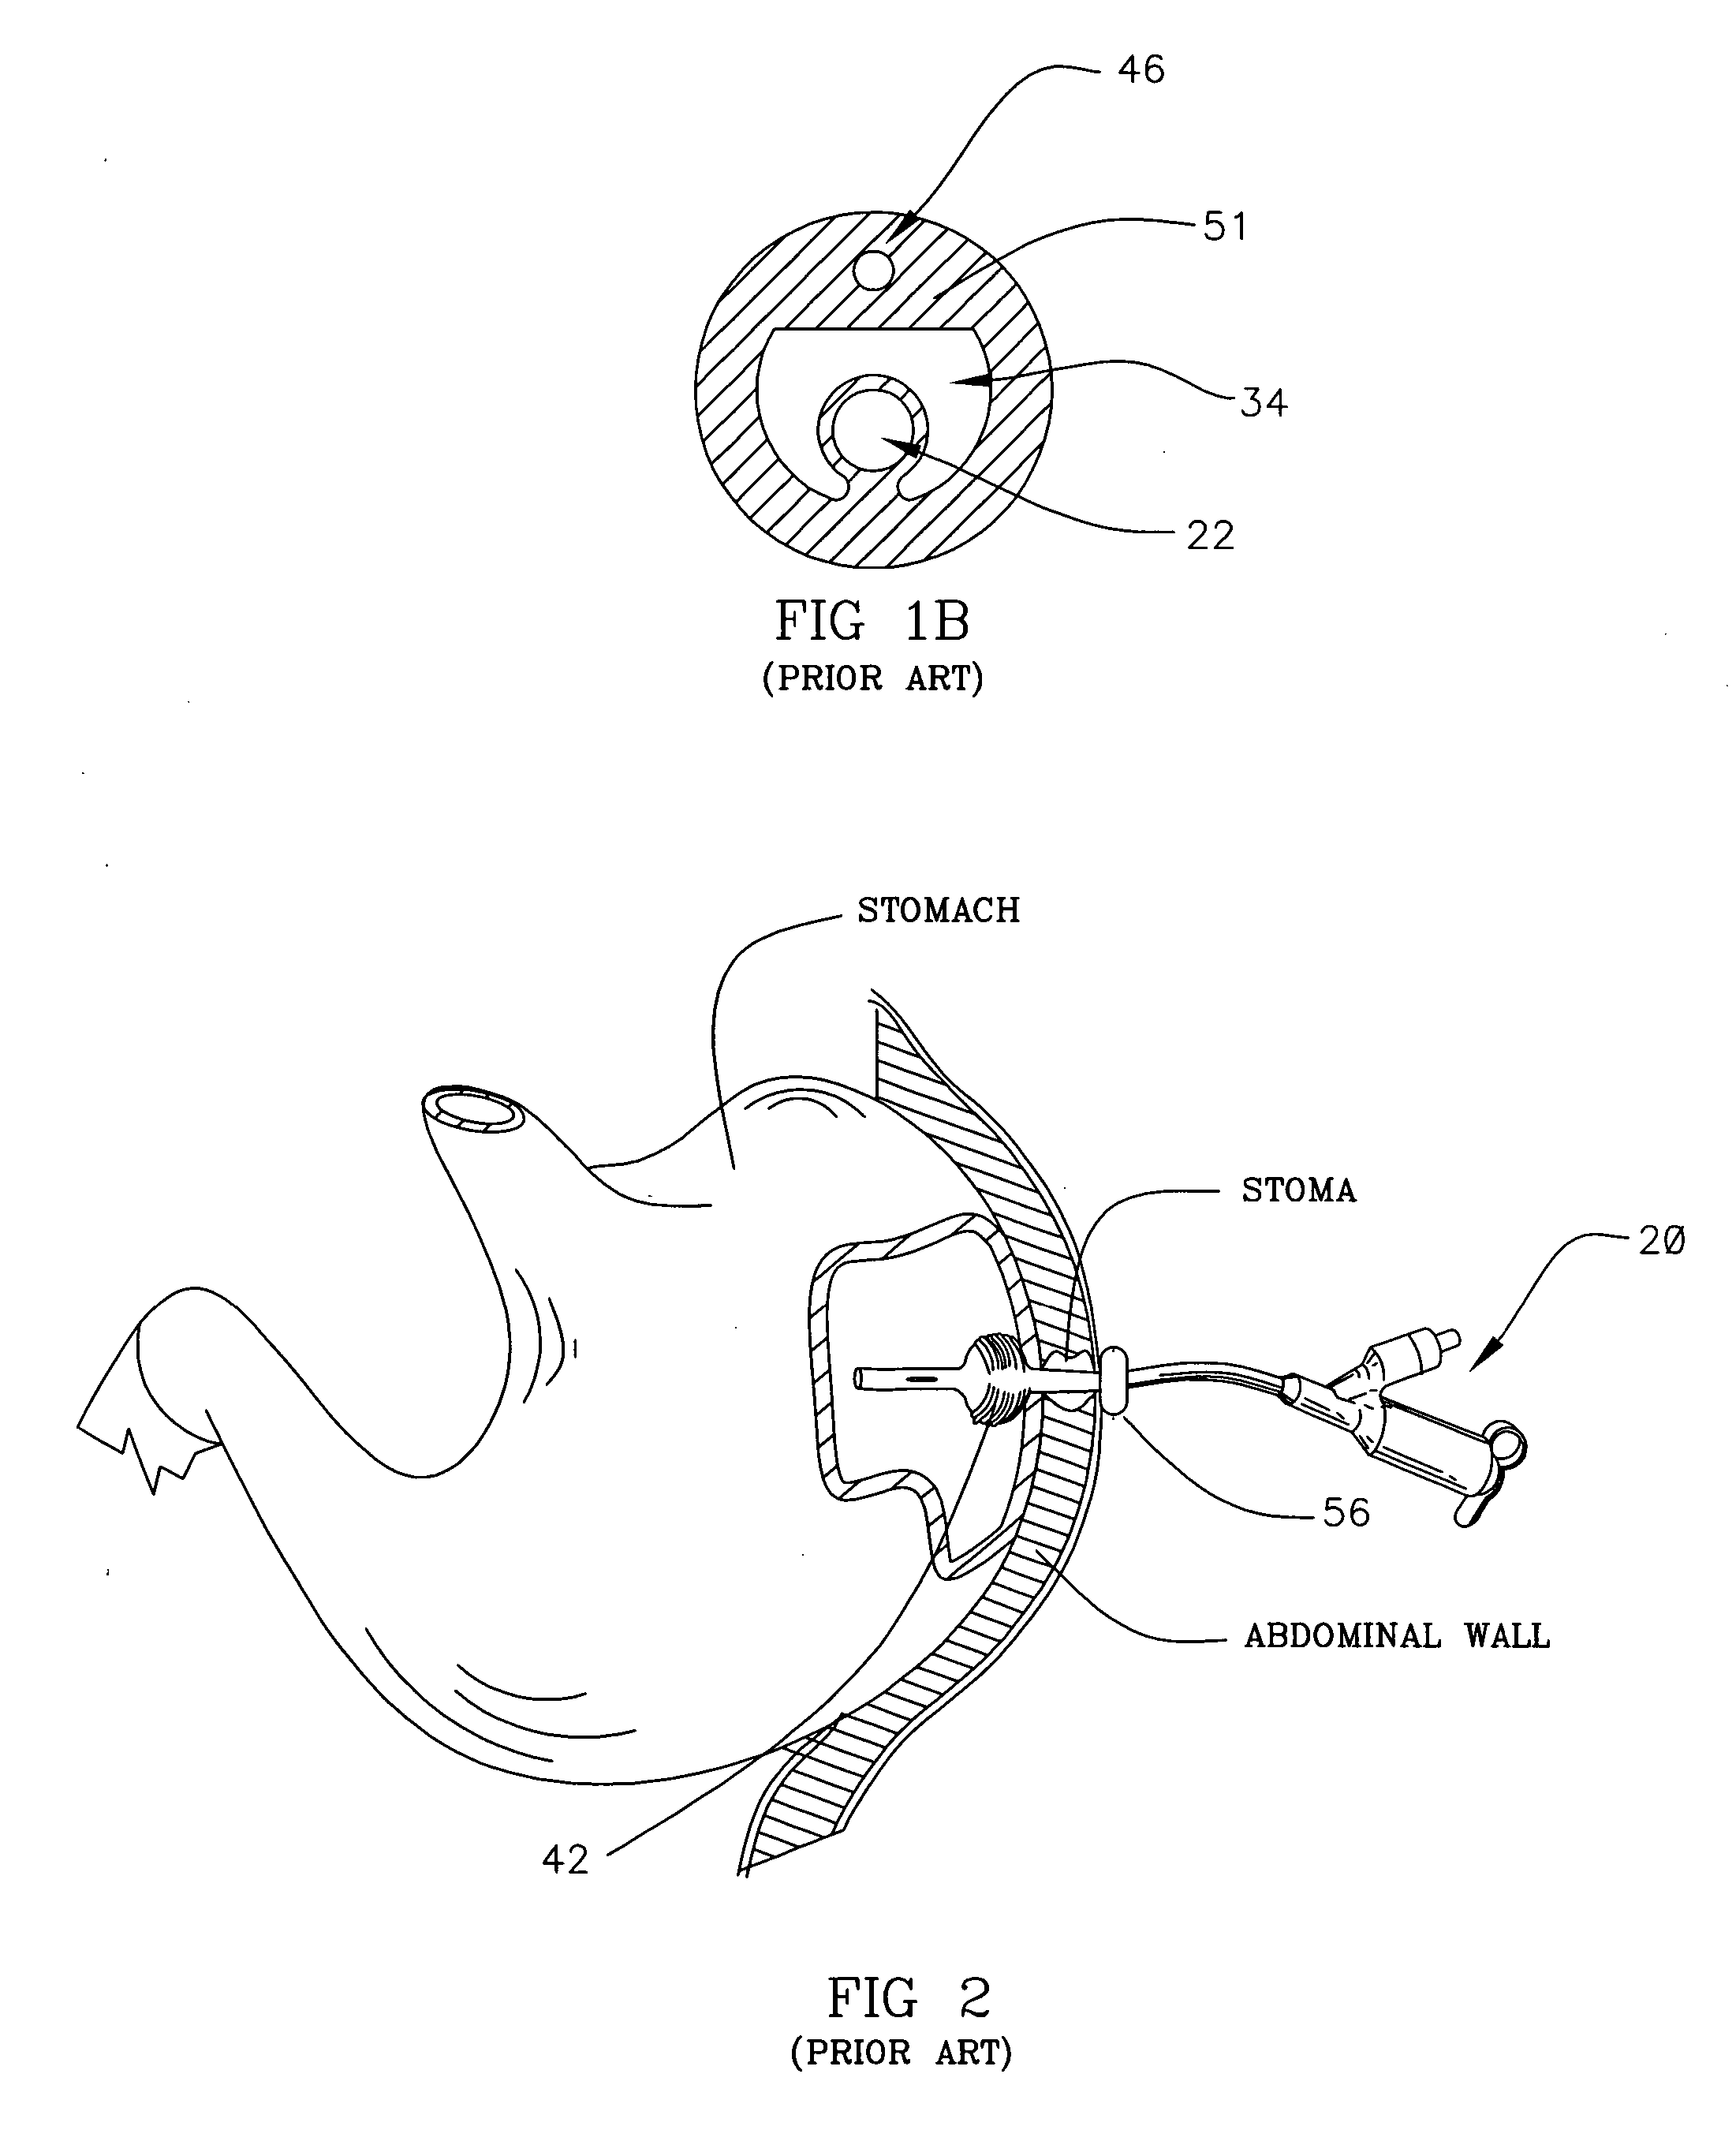 Connector with connection mechanism adapted for releasable interconnection with tube